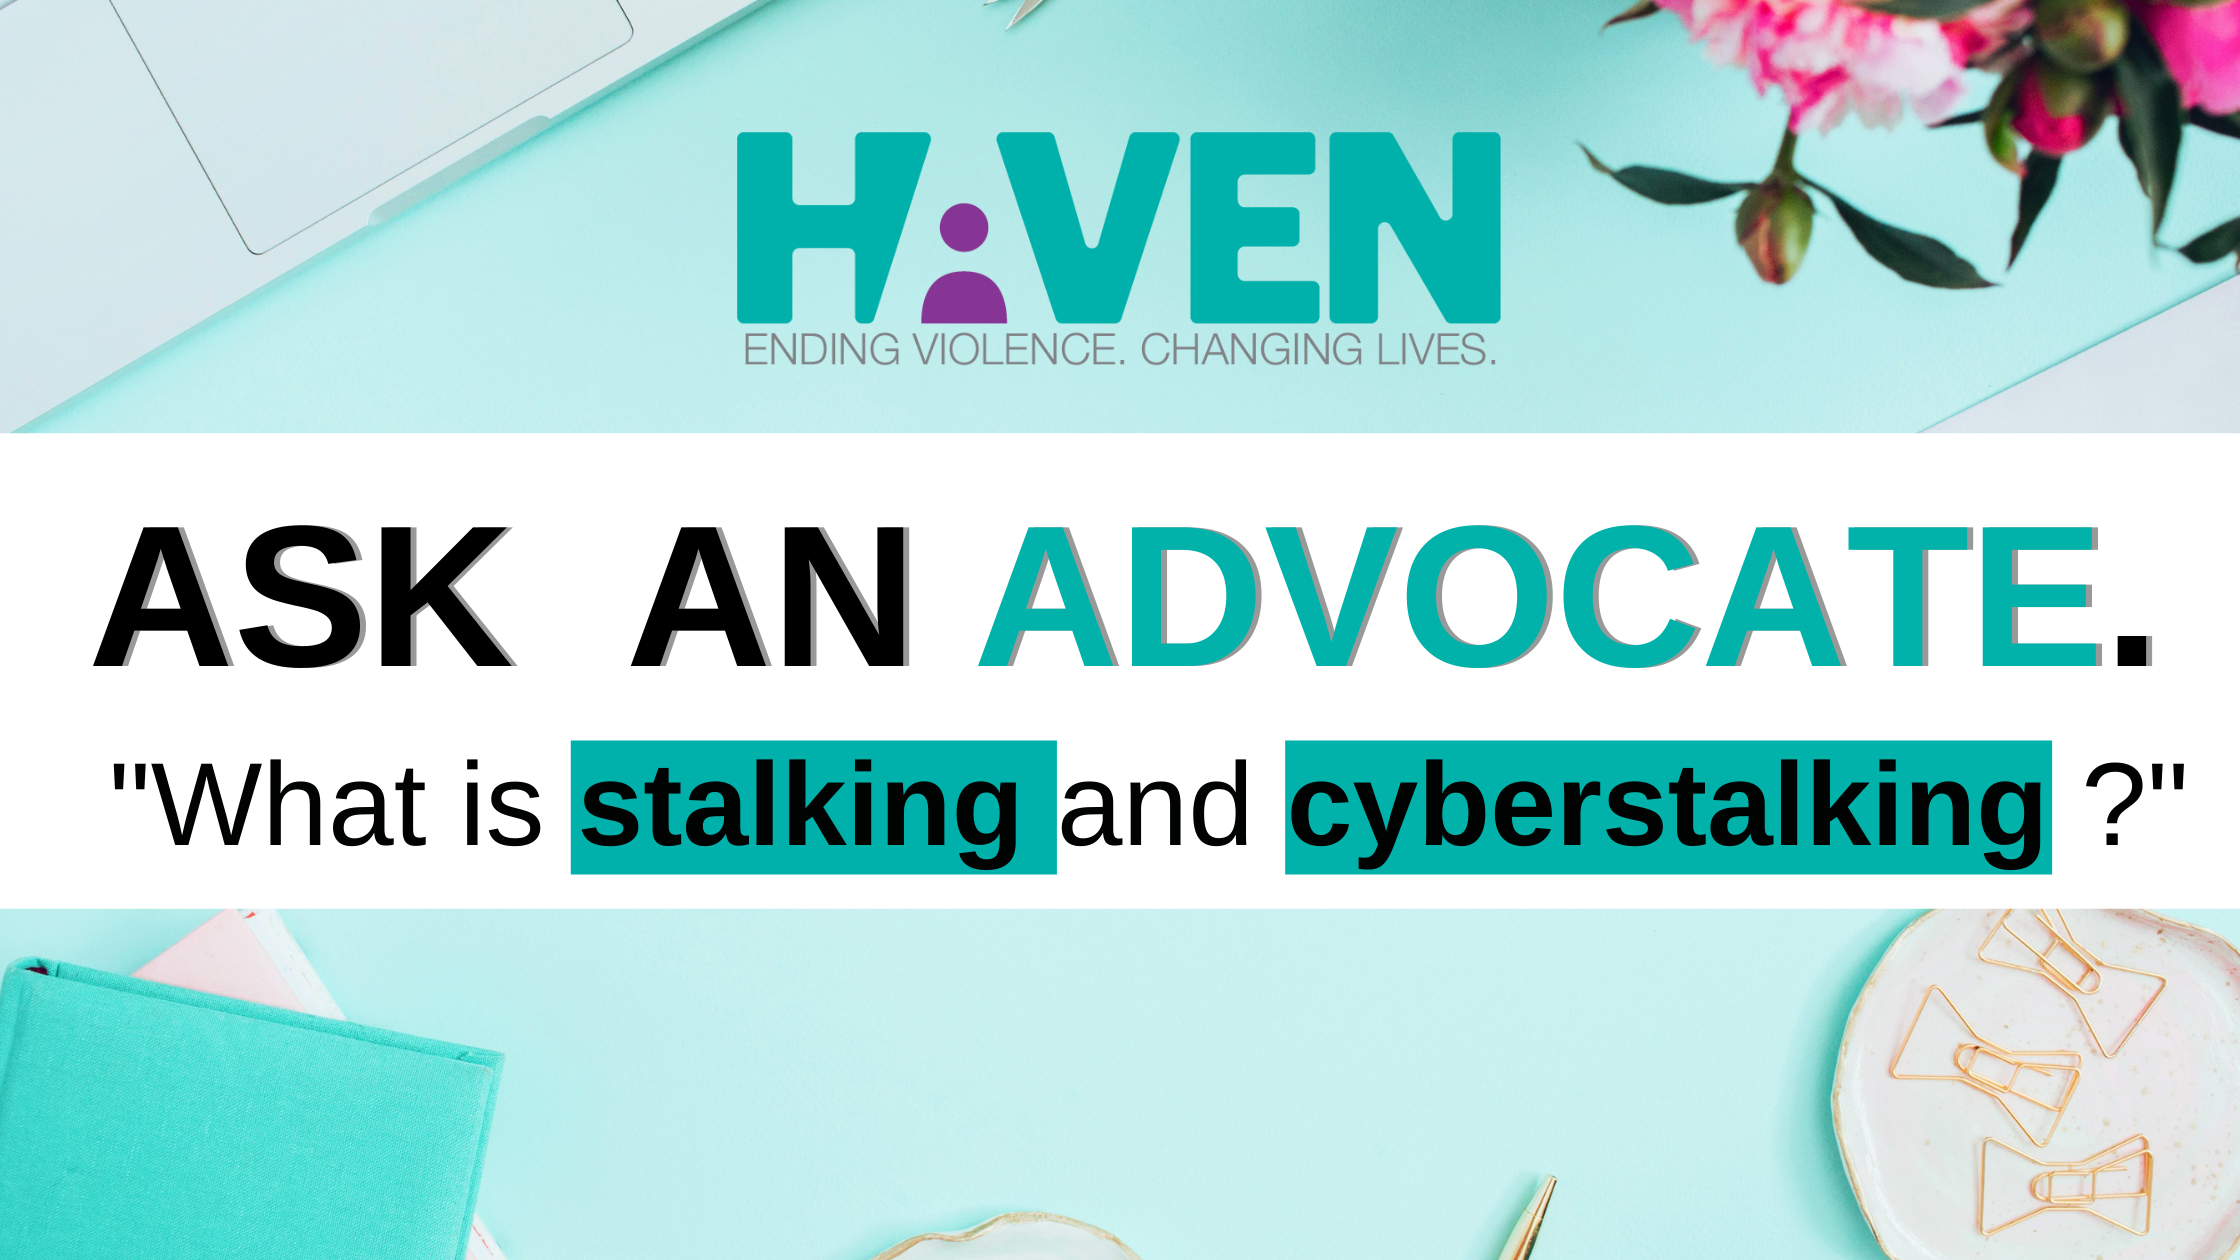 Ask an advocate: What is stalking and cyberstalking?